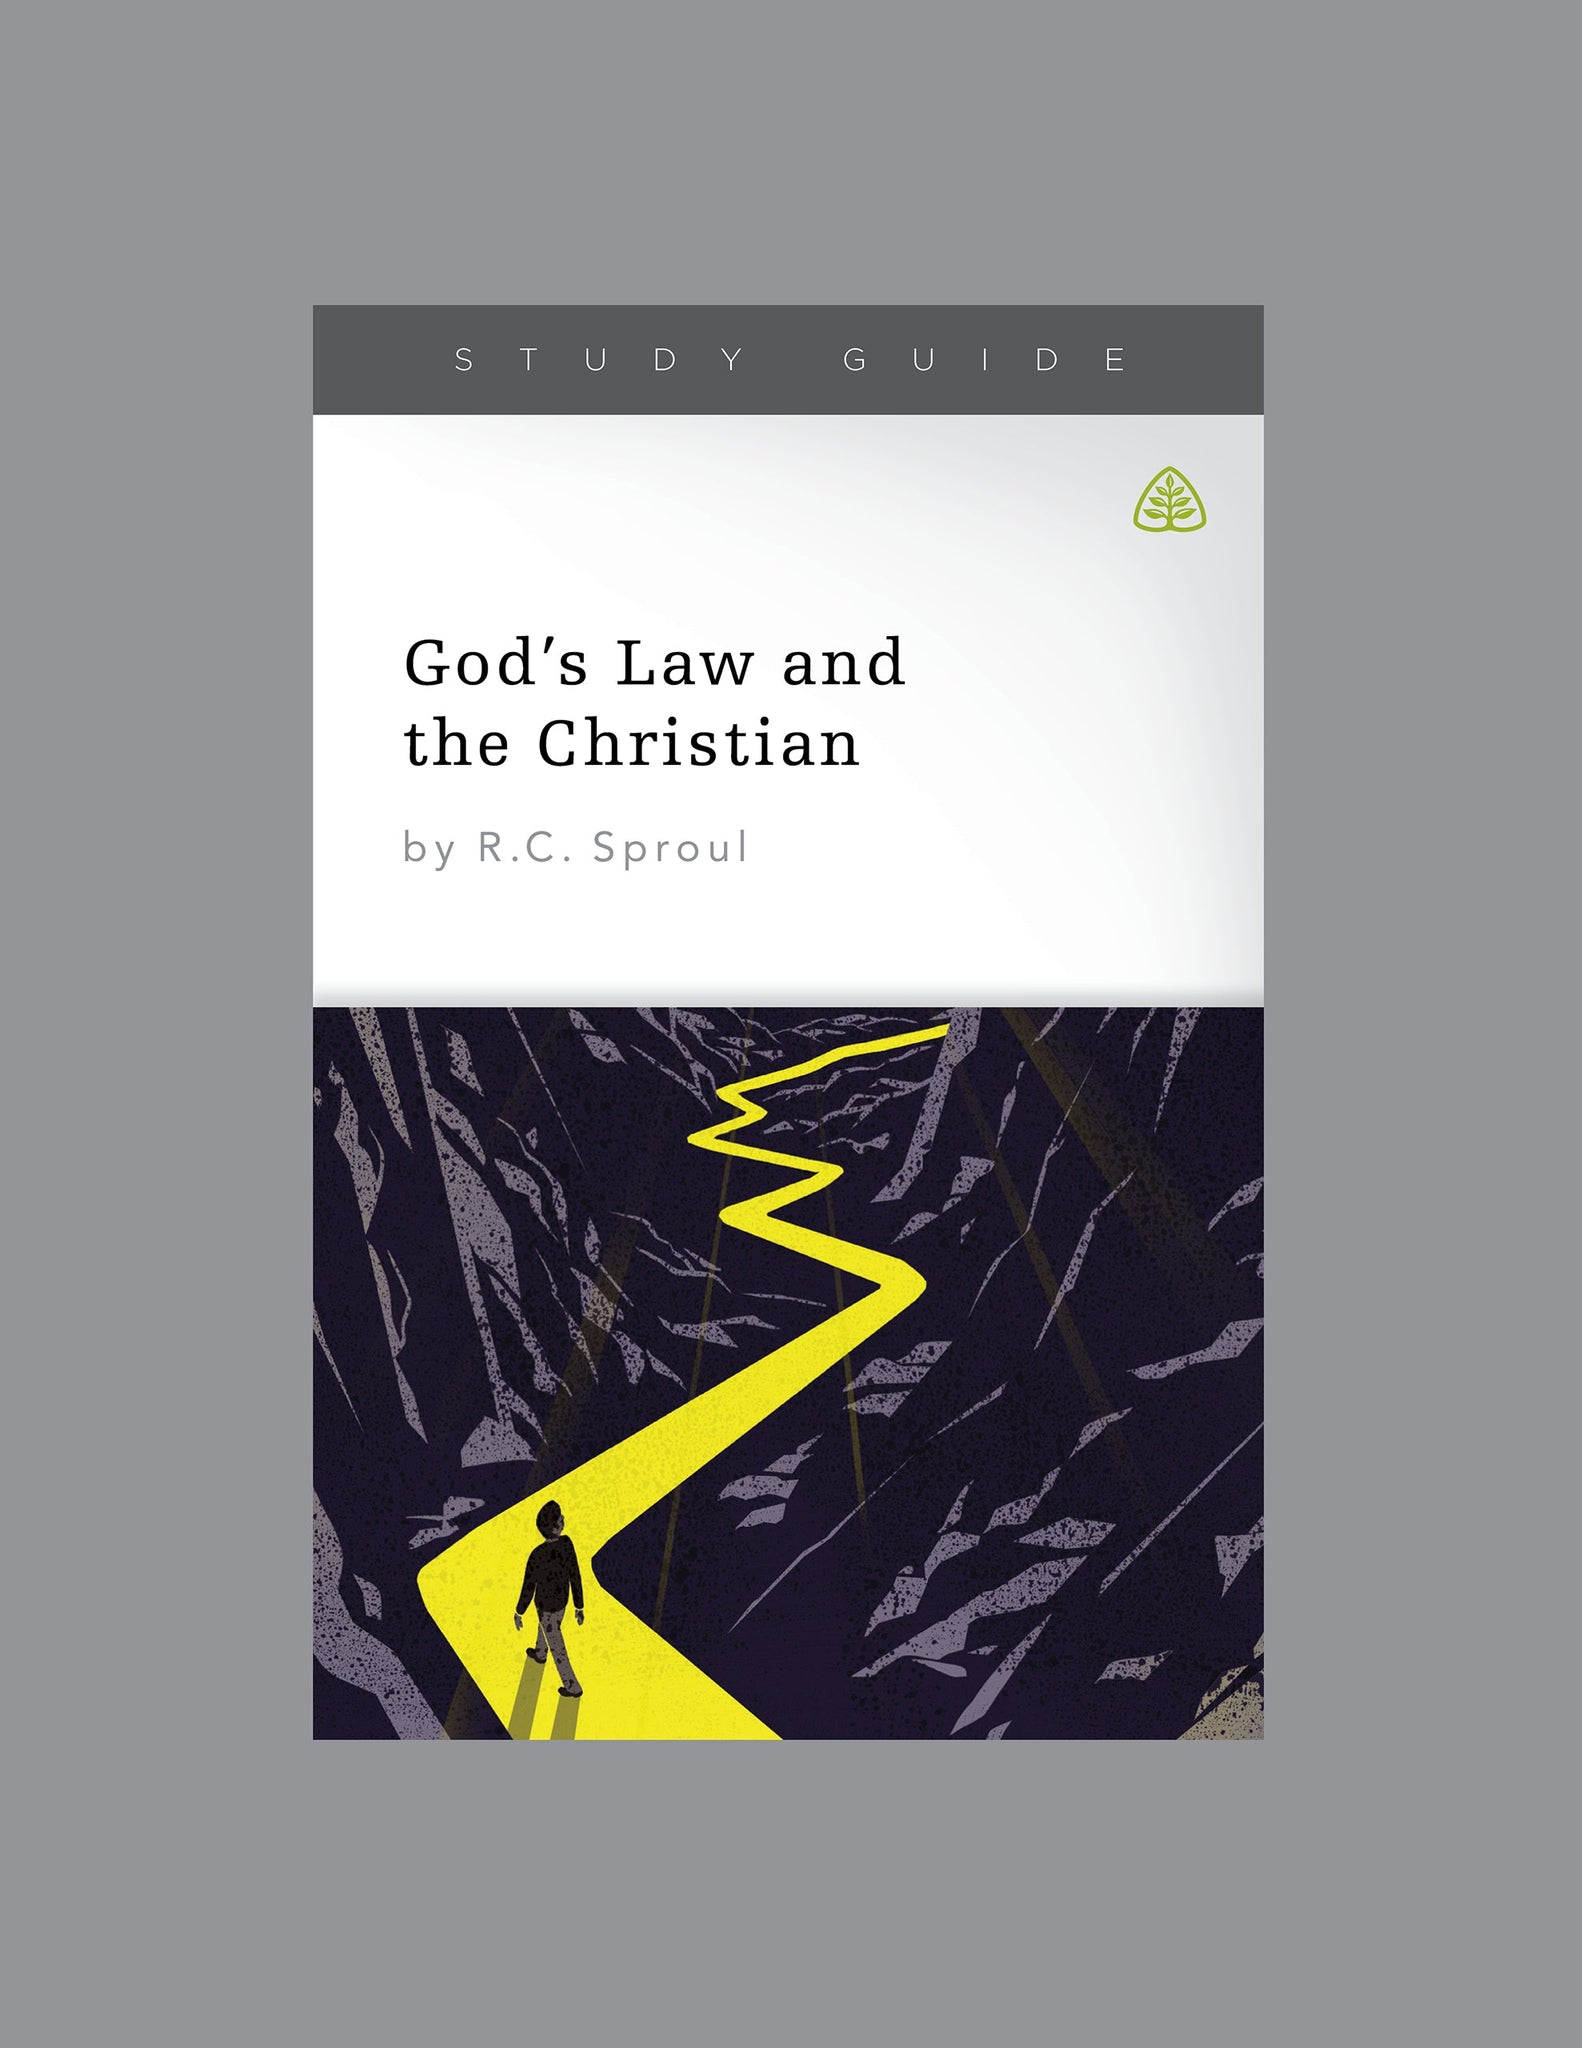 Ligonier Teaching Series - God's Law and the Christian: Study Guide